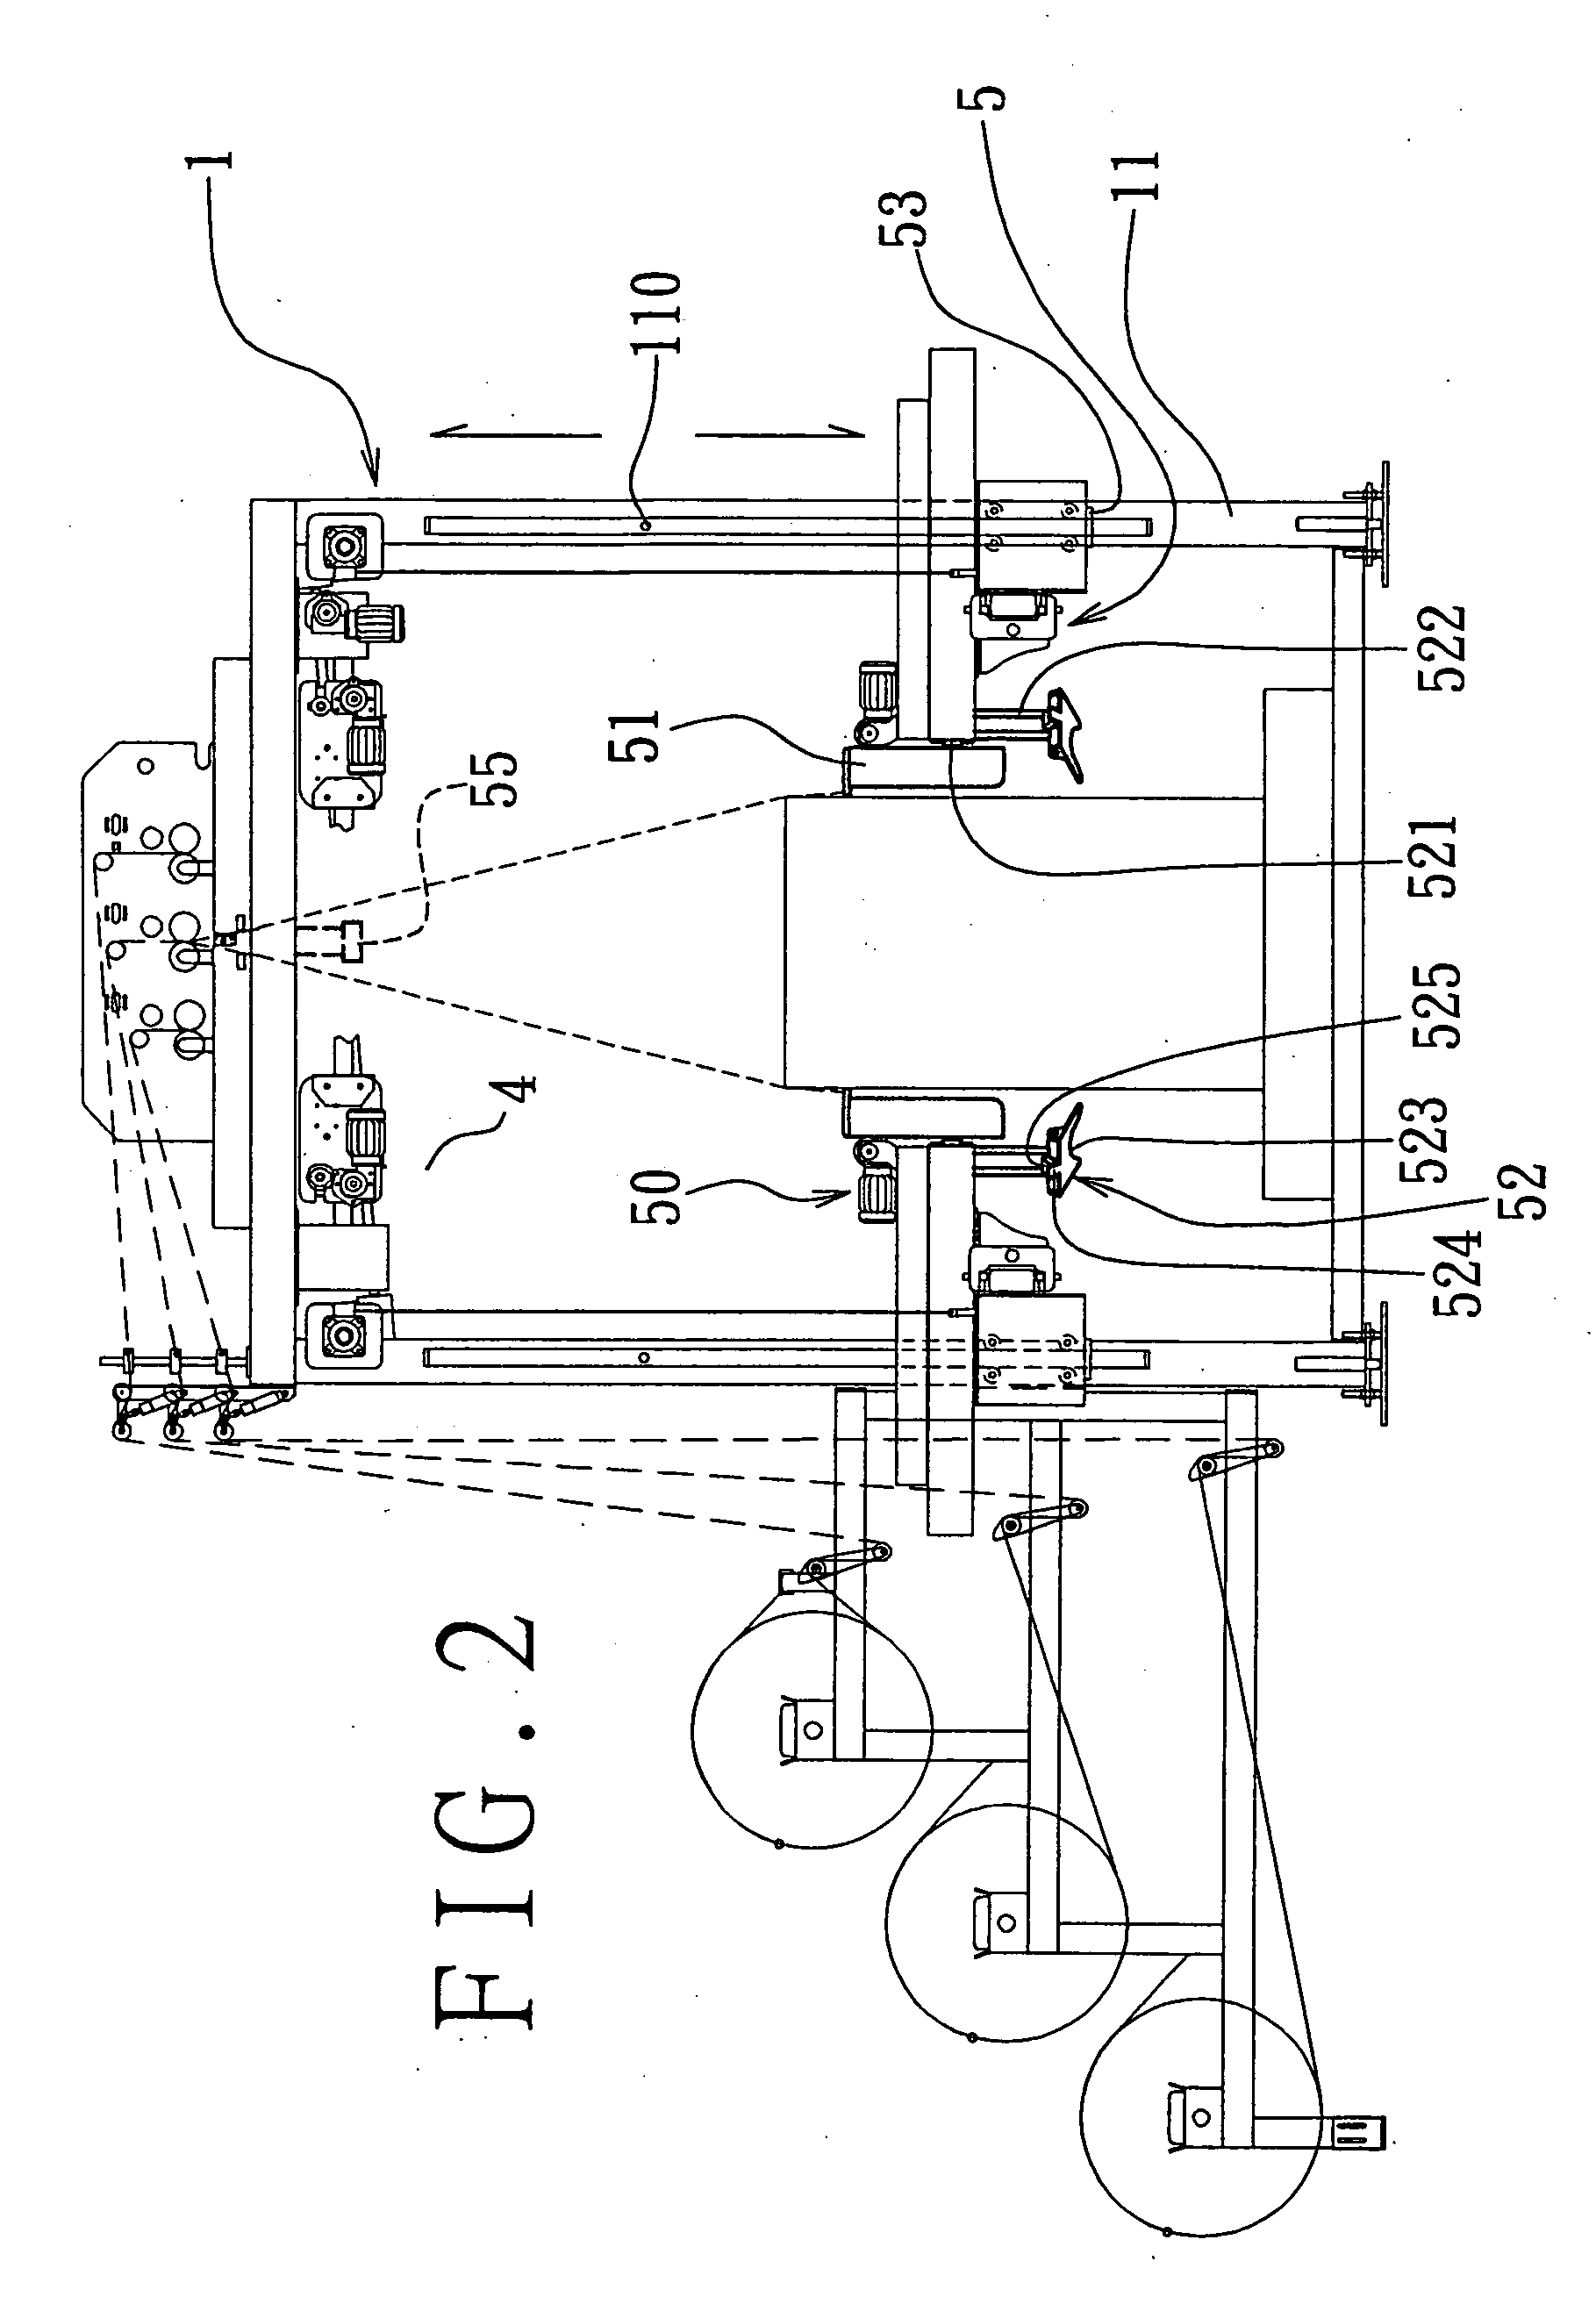 Detecting and protecting device of a shrink film machine